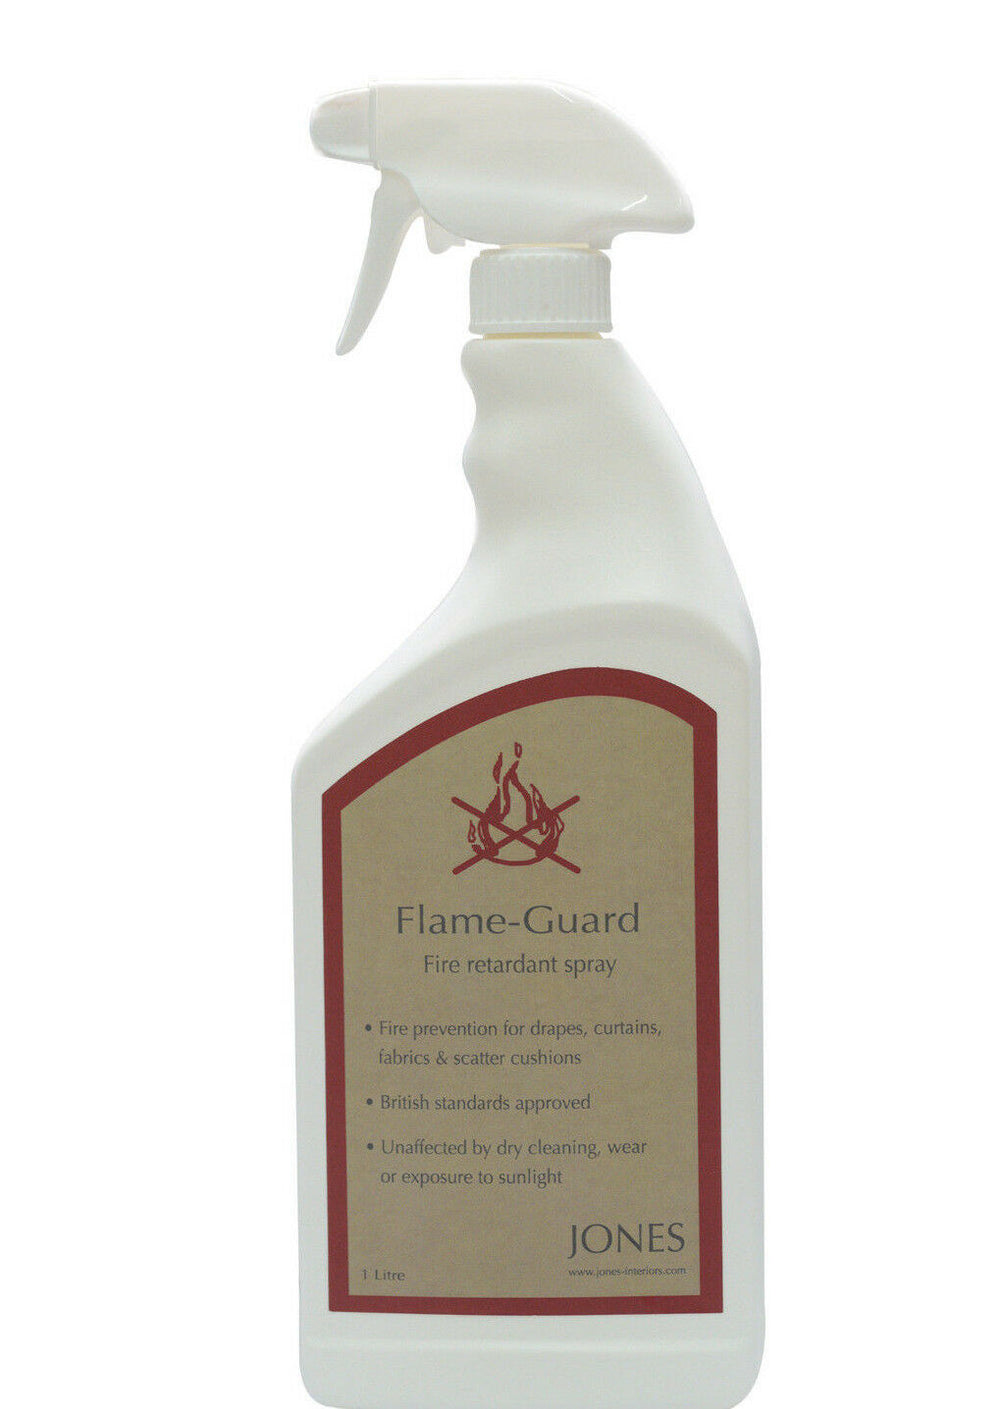 1 Ltr Fire & Flame Retardant Spray For Fabric Curtains Upholstery Cushions